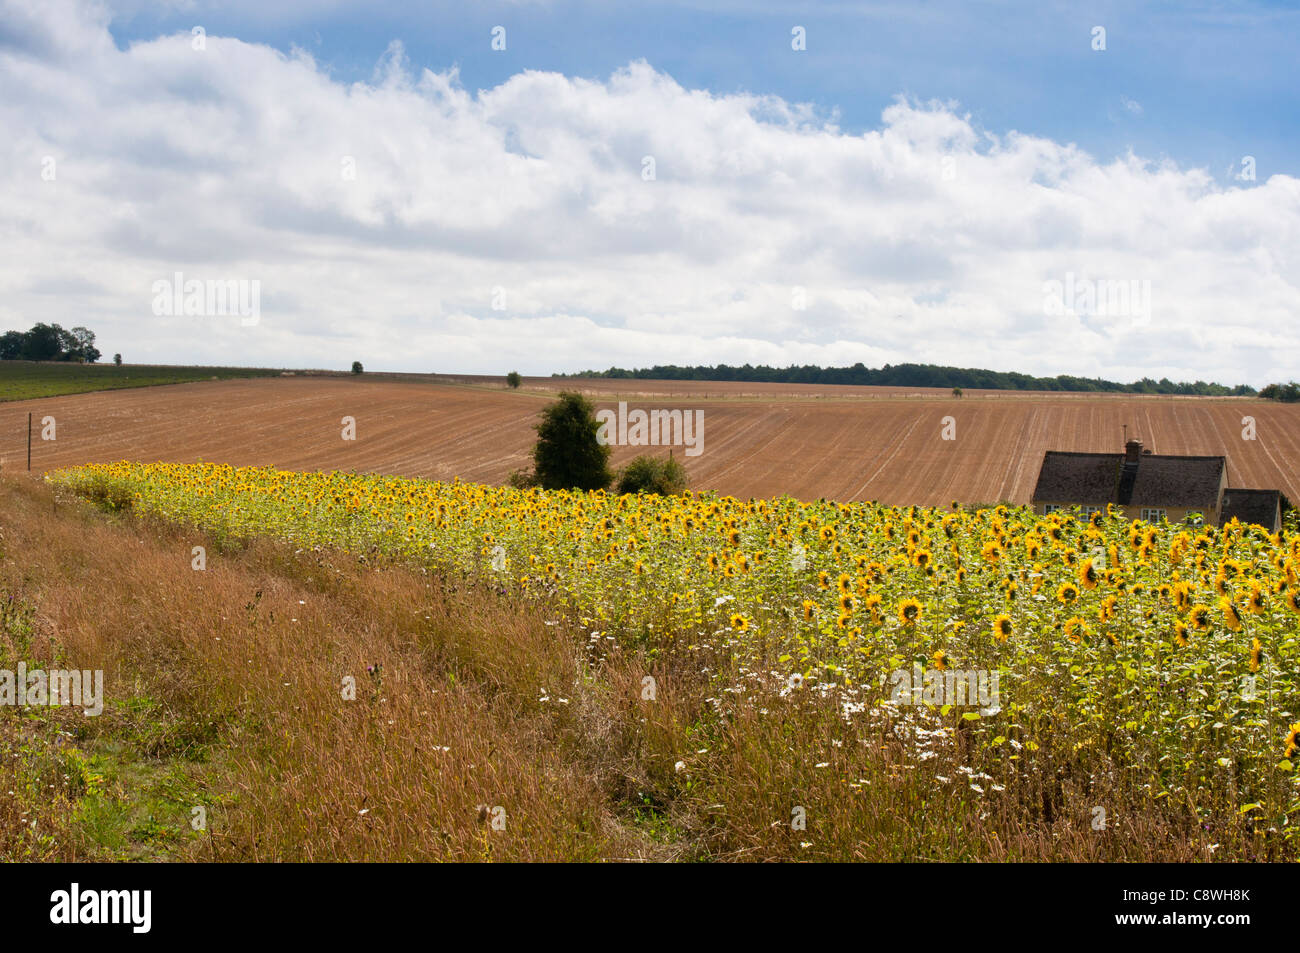 A field of sunflowers at Snowhill in the Worcestershire Cotwolds. England. Stock Photo